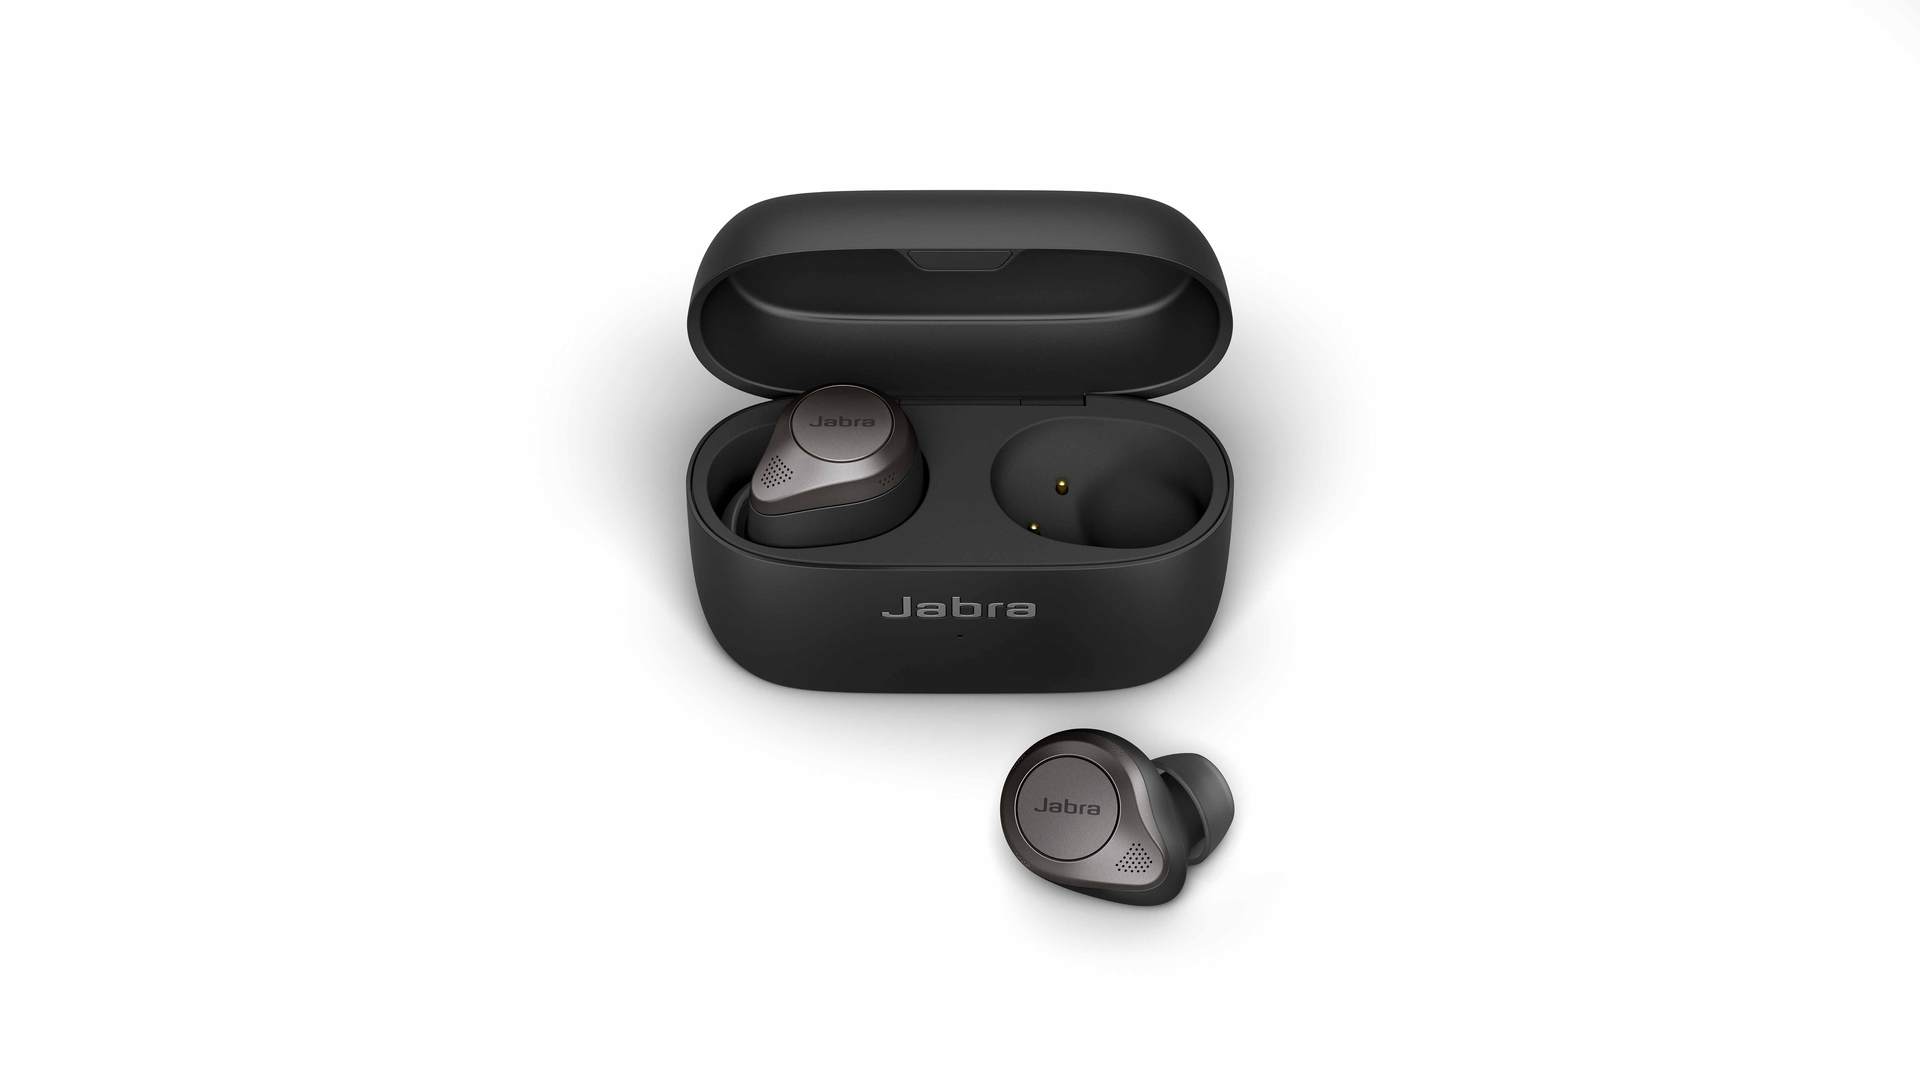 Jabra announces new Elite 85t earbuds, releases ANC update for 75t earbuds  Android Authority